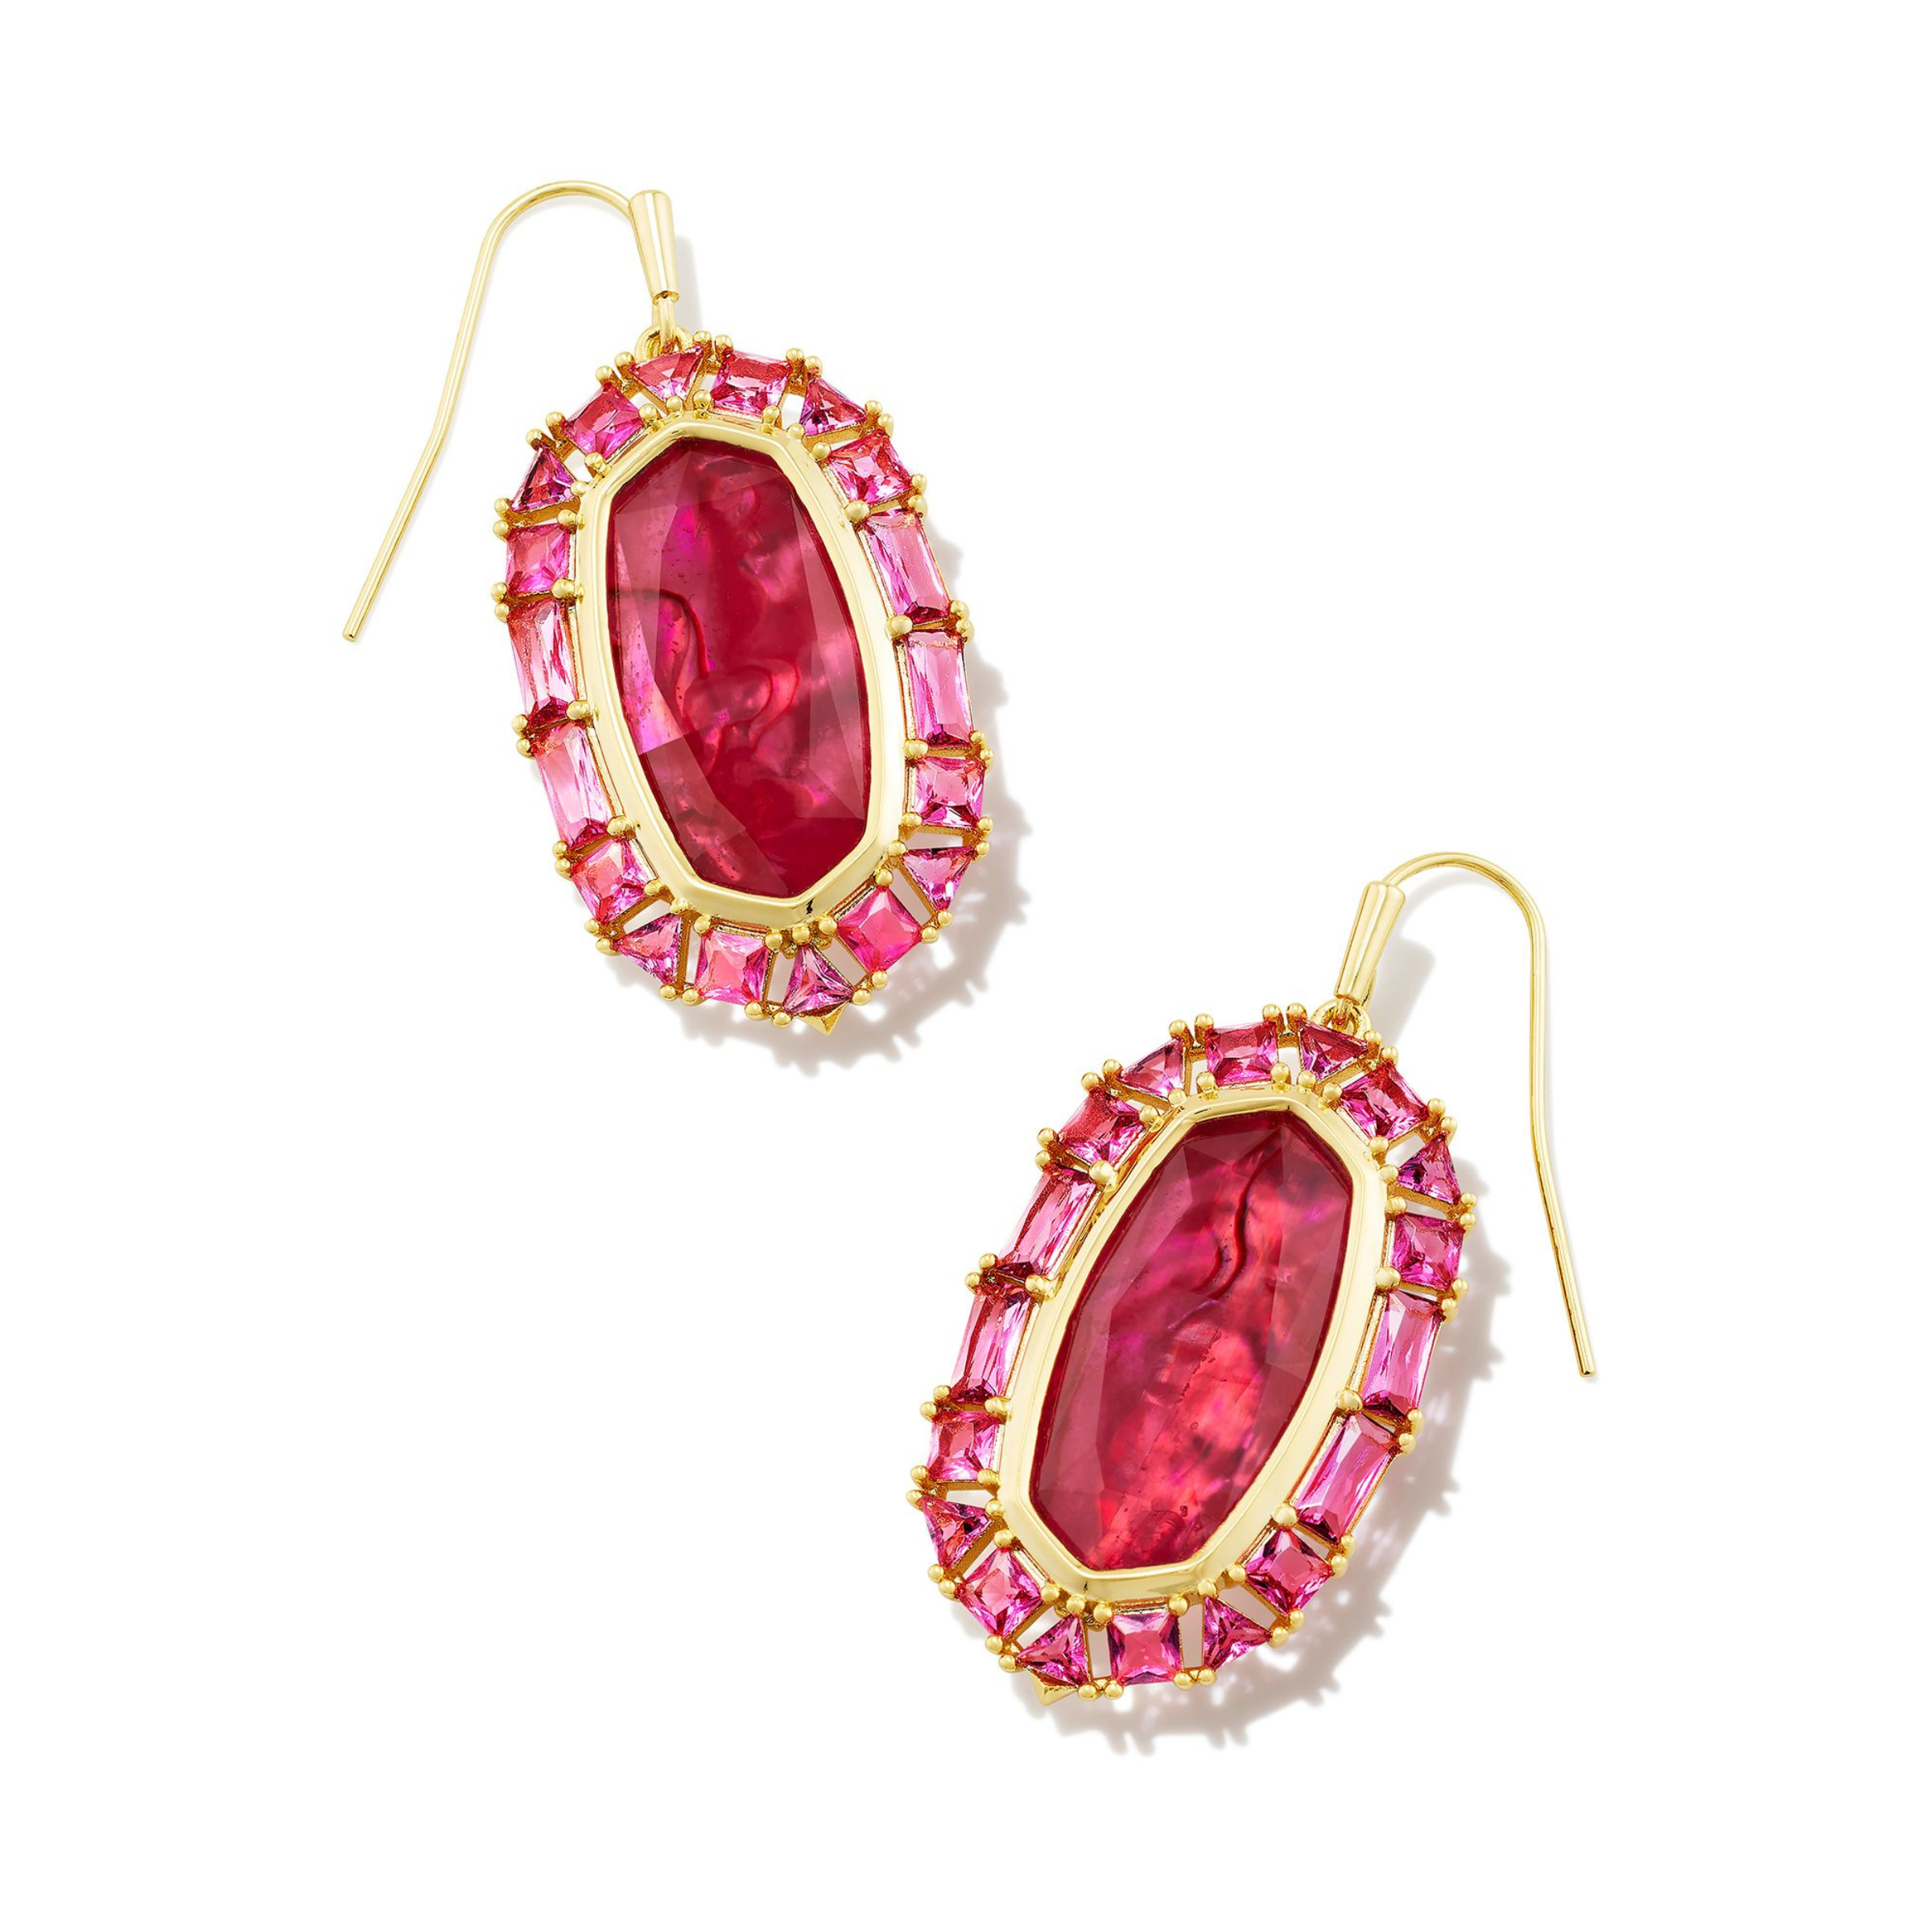 Gold, clear crystal frame drop earrings with raspberry illusion center stone pictured on a white background.